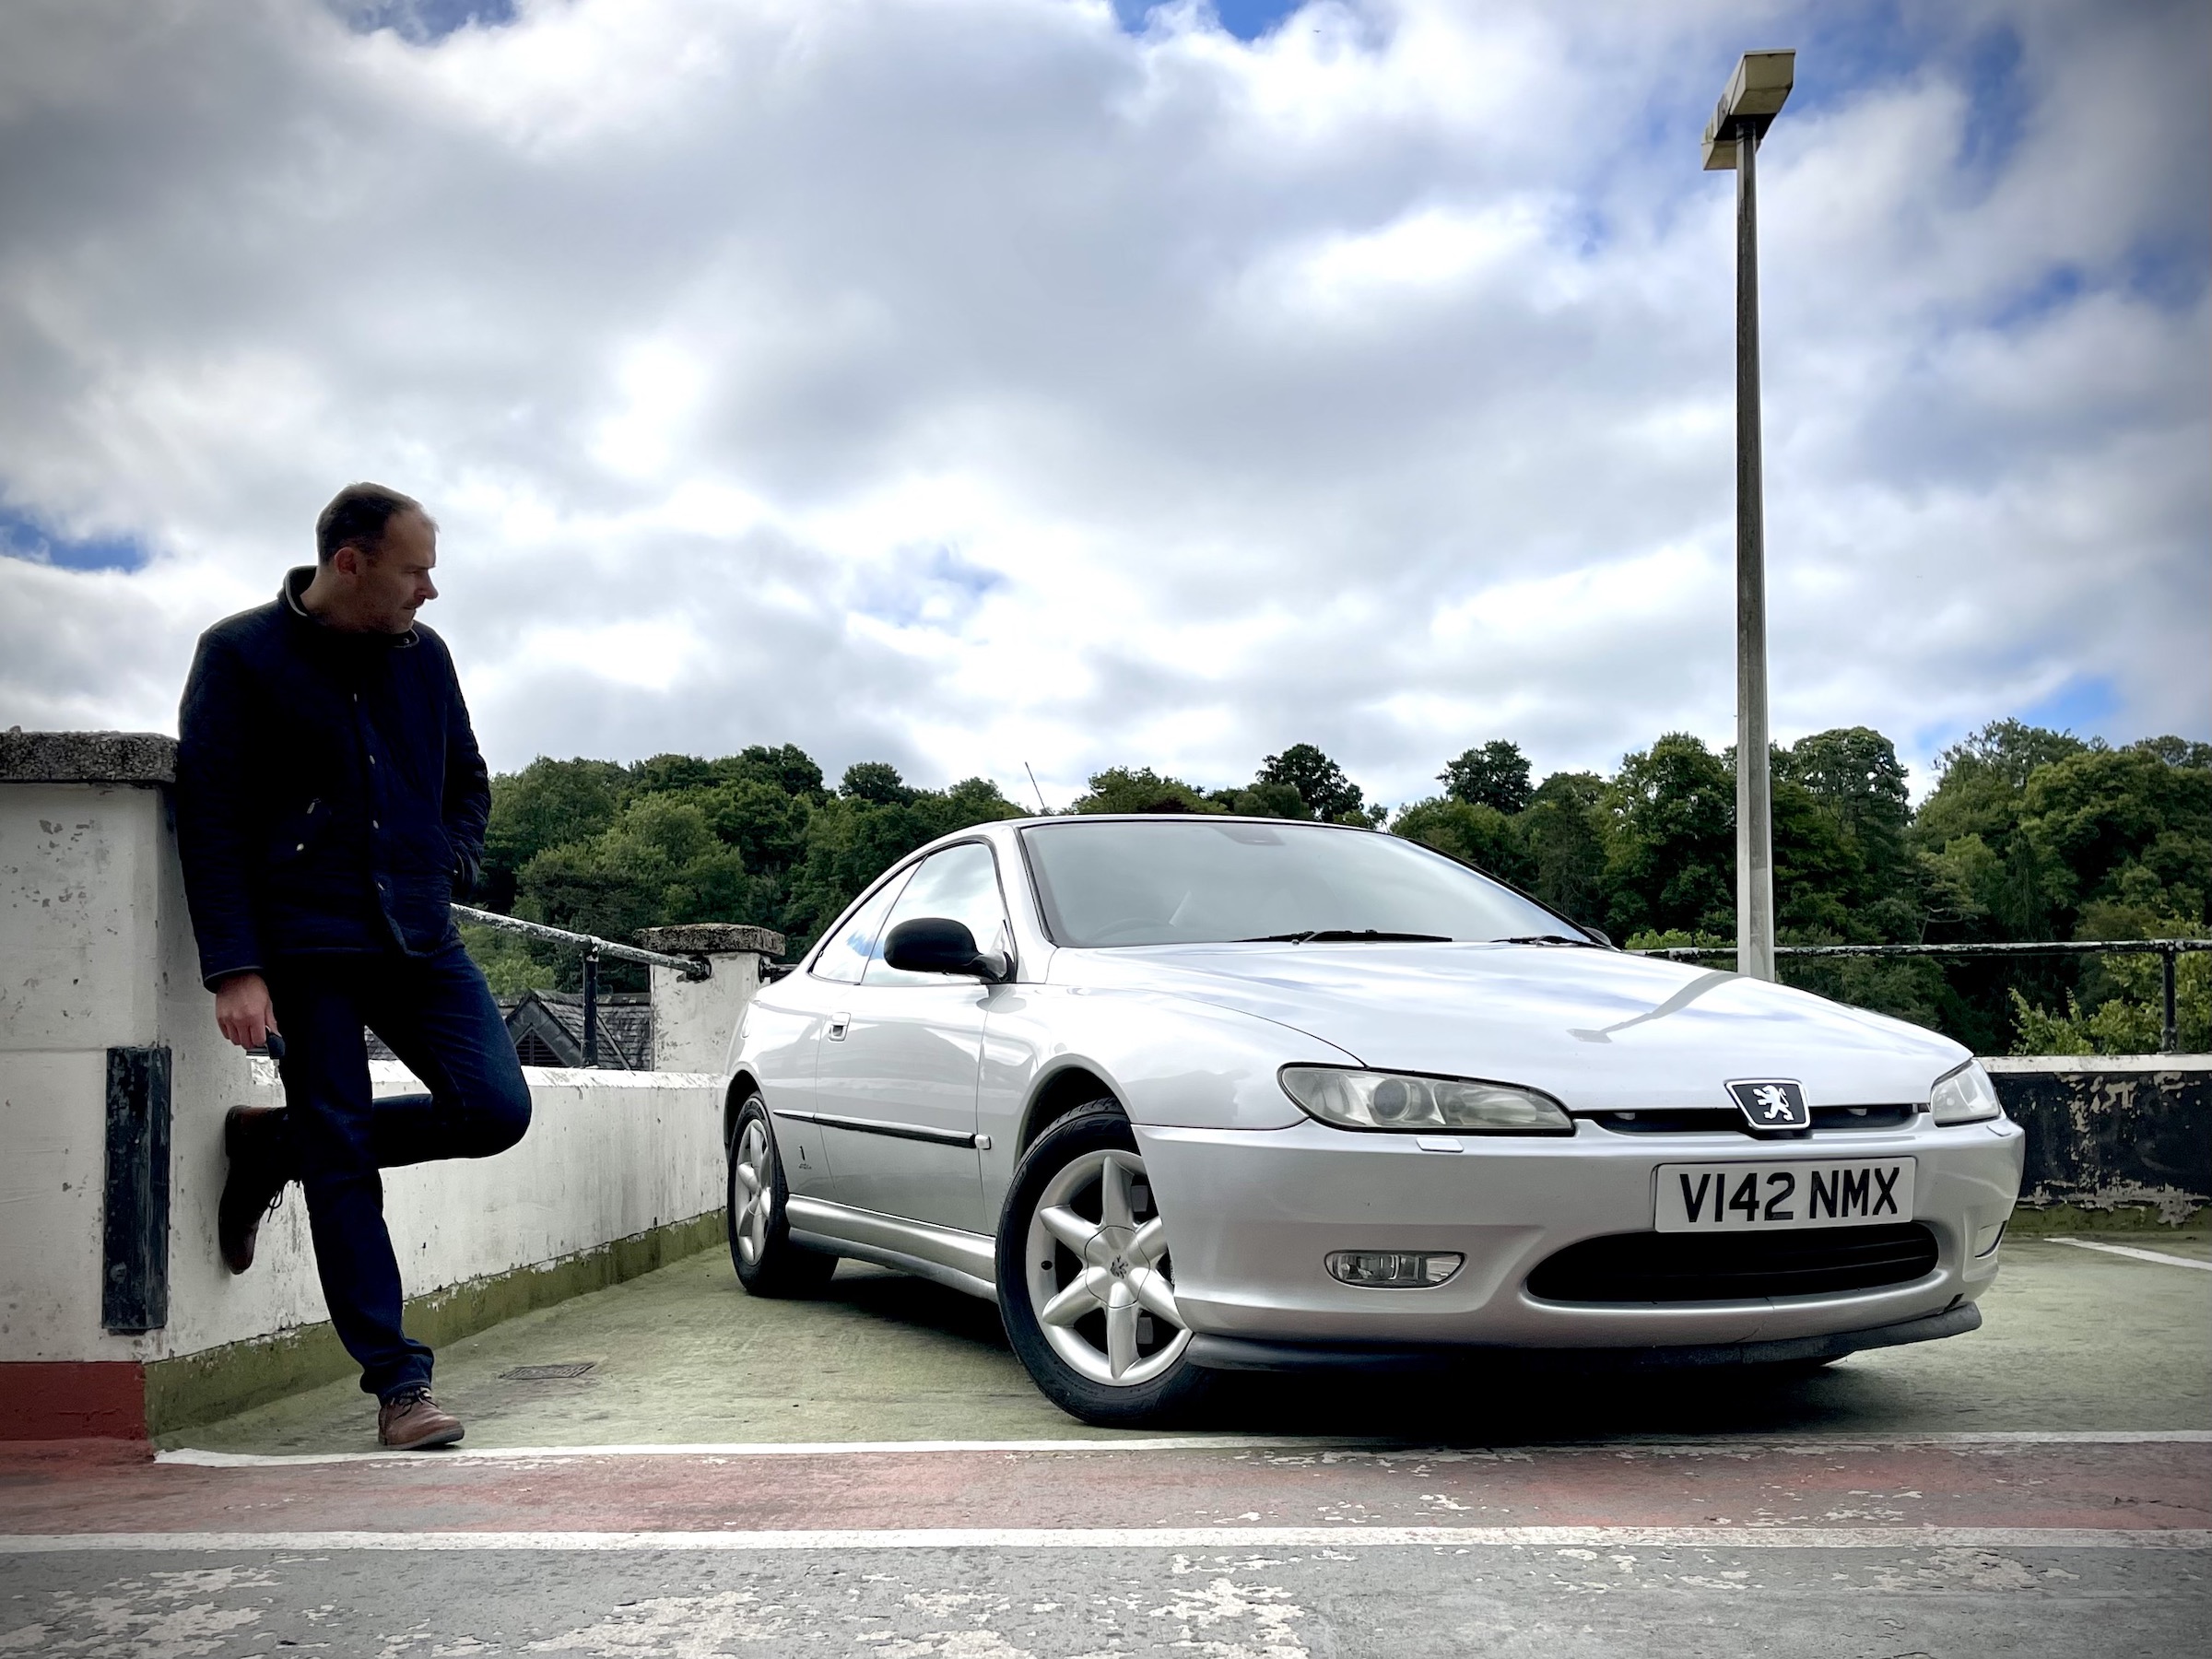 Saving and restoring a Peugeot 406 Coupé pushed me to my limits – but I'm glad I did